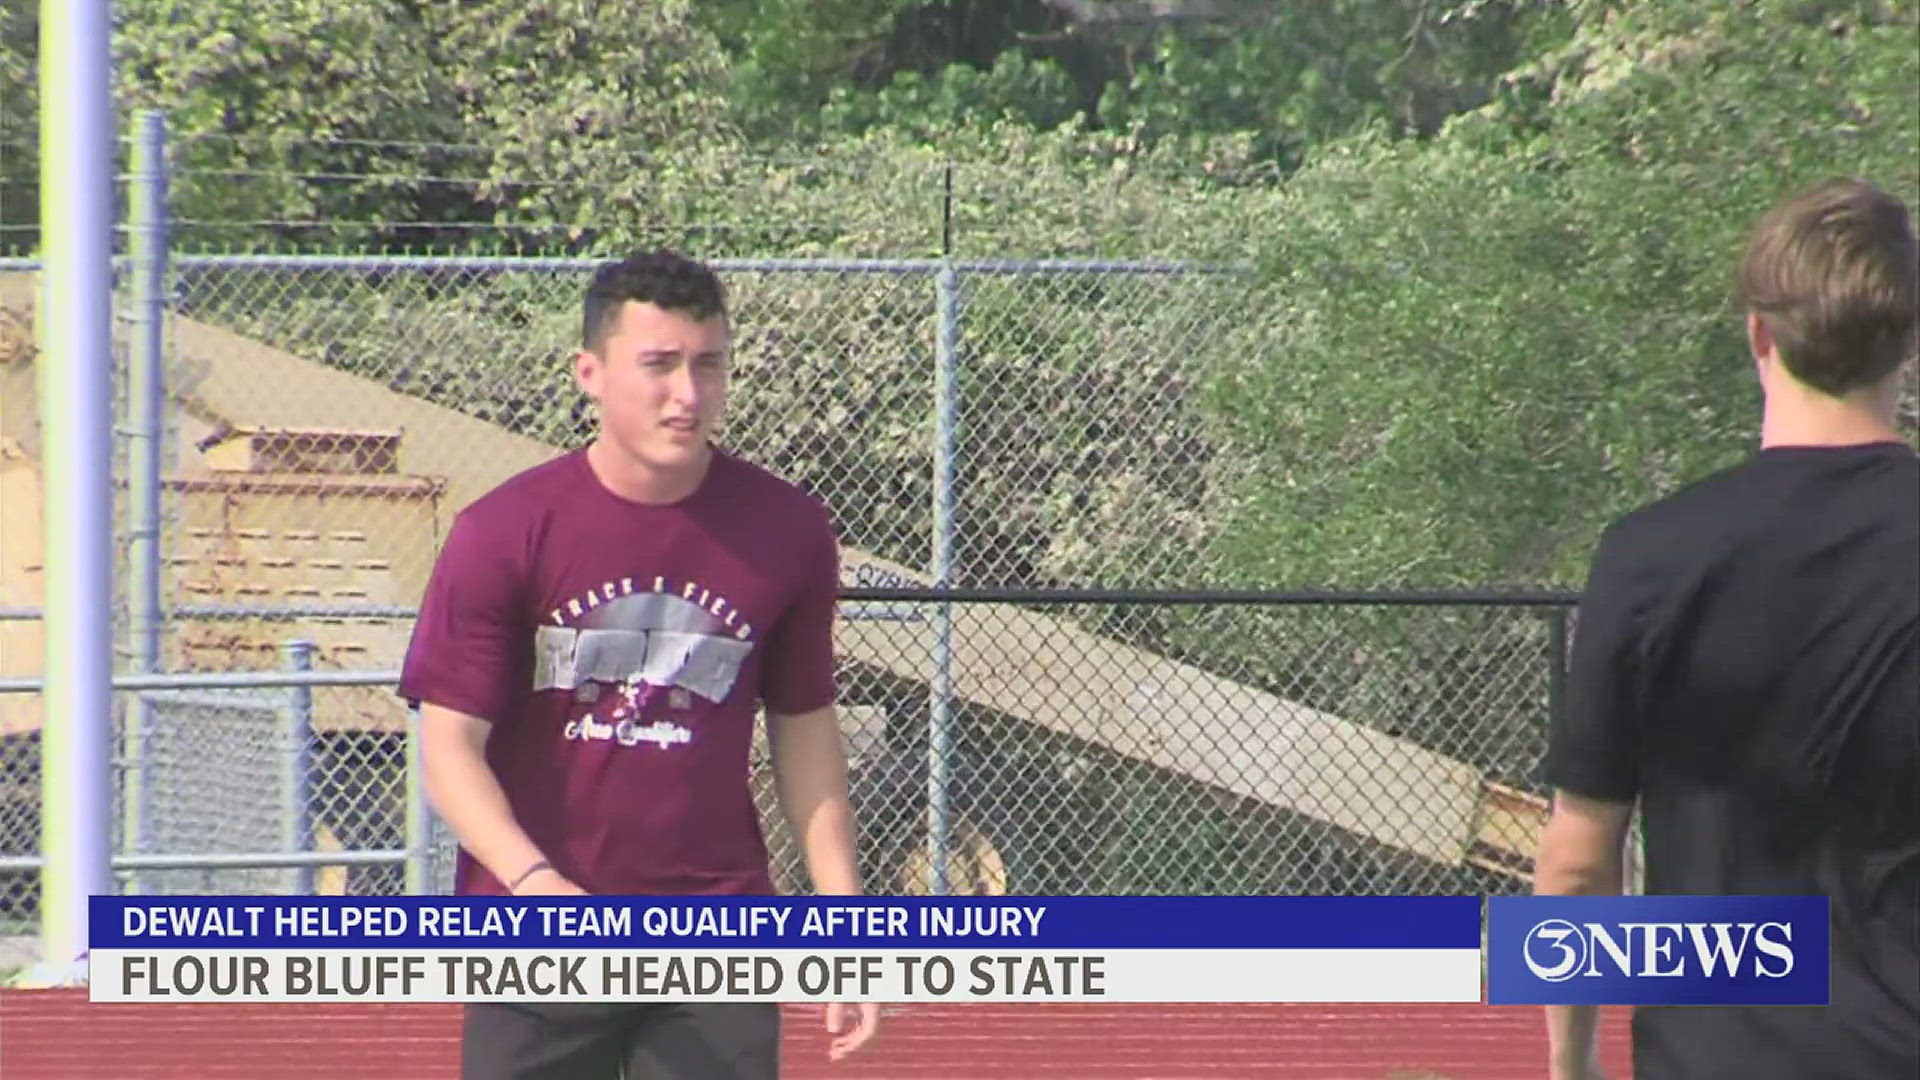 Zach DeWalt had to drop out of his individual events due to a hamstring injury, but was able qualify for state as part of the 4x400 relay team.